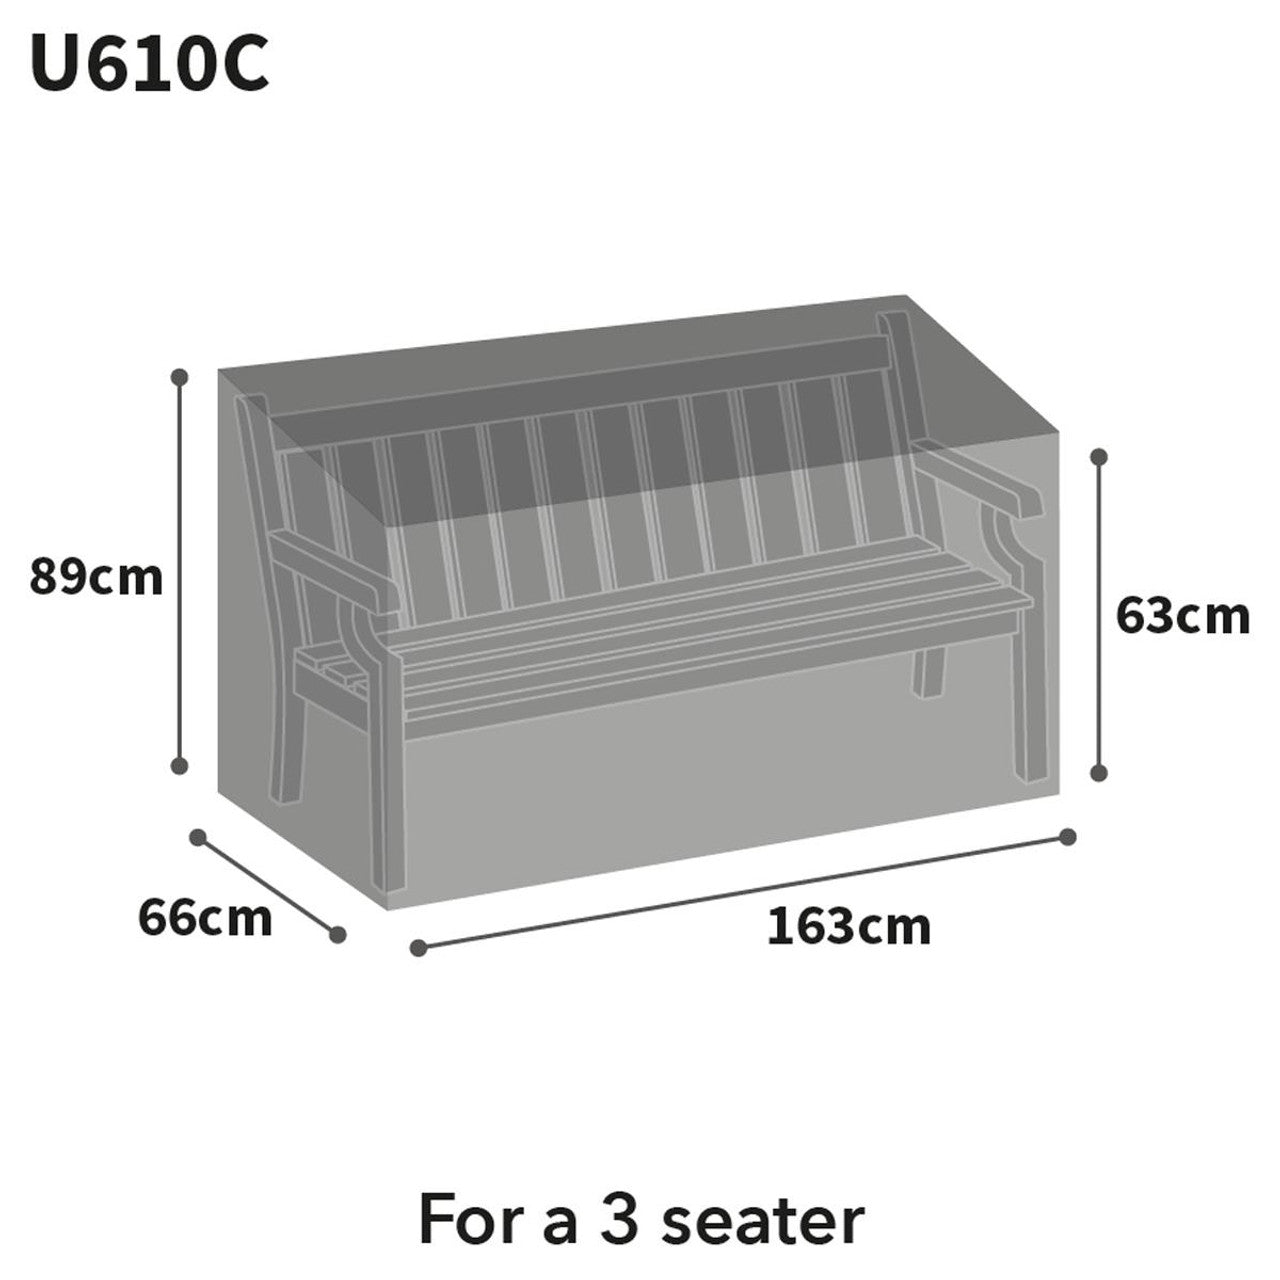 Bosmere Ultimate Protector Outdoor Furniture Cover For Bench/Bistro Set